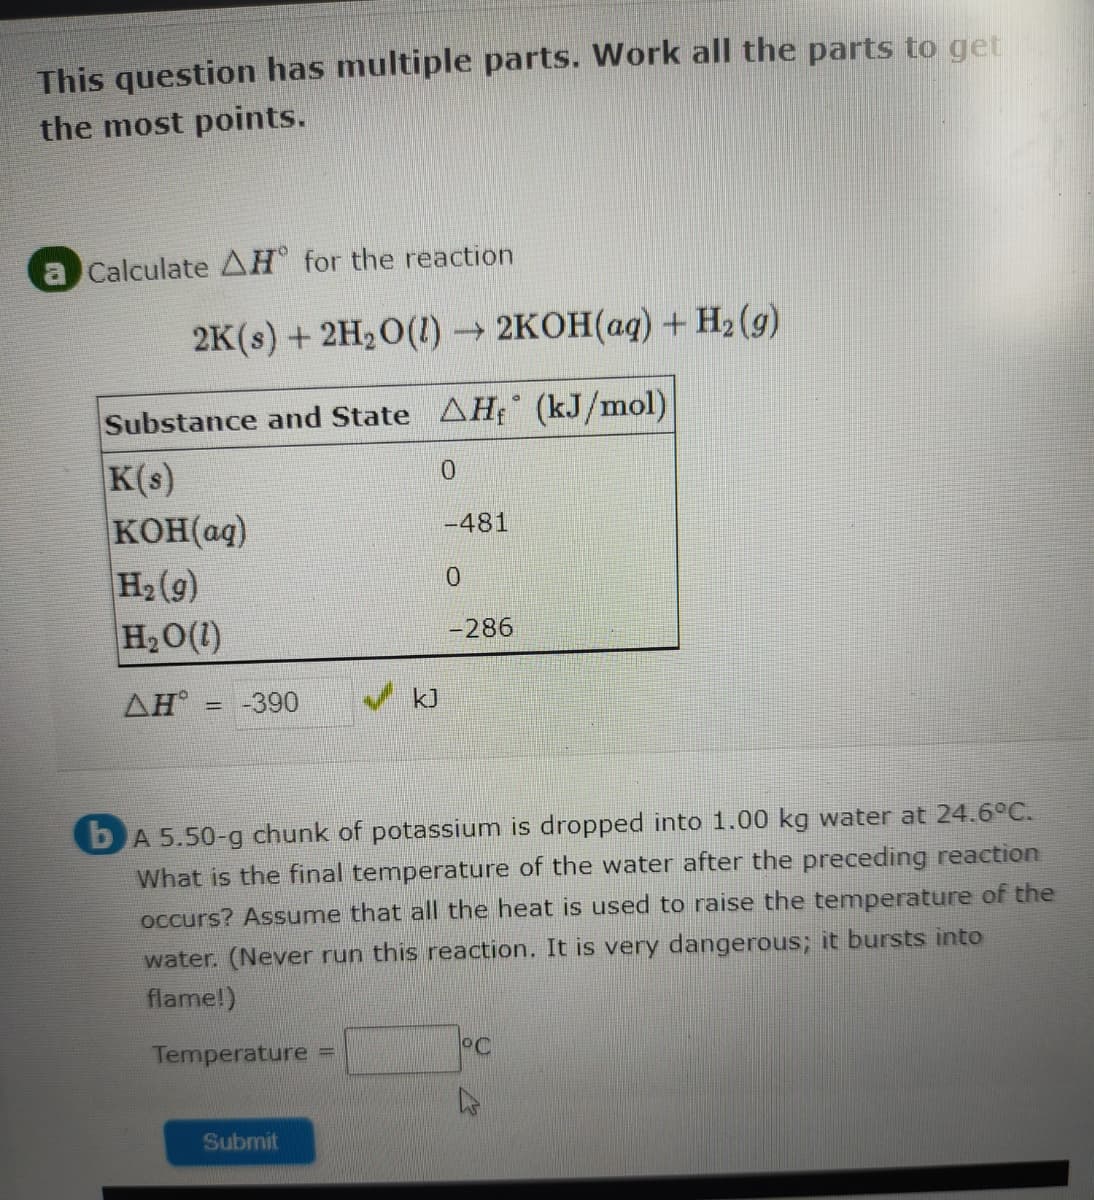 This question has multiple parts. Work all the parts to get
the most points.
Calculate AH for the reaction
2K() + 2H,О(1)- 2КОН(ад) + На (9)
Substance and State AH (kJ/mol)
K(s)
KOH(aq)
H2(g)
H20(1)
-481
-286
ΔΗ
-390
kJ
%3D
bA 5.50-g chunk of potassium is dropped into 1.00 kg water at 24.6°C.
What is the final temperature of the water after the preceding reaction
occurs? Assume that all the heat is used to raise the temperature of the
water. (Never run this reaction. It is very dangerous; it bursts into
flame!)
Temperature =
Submit
